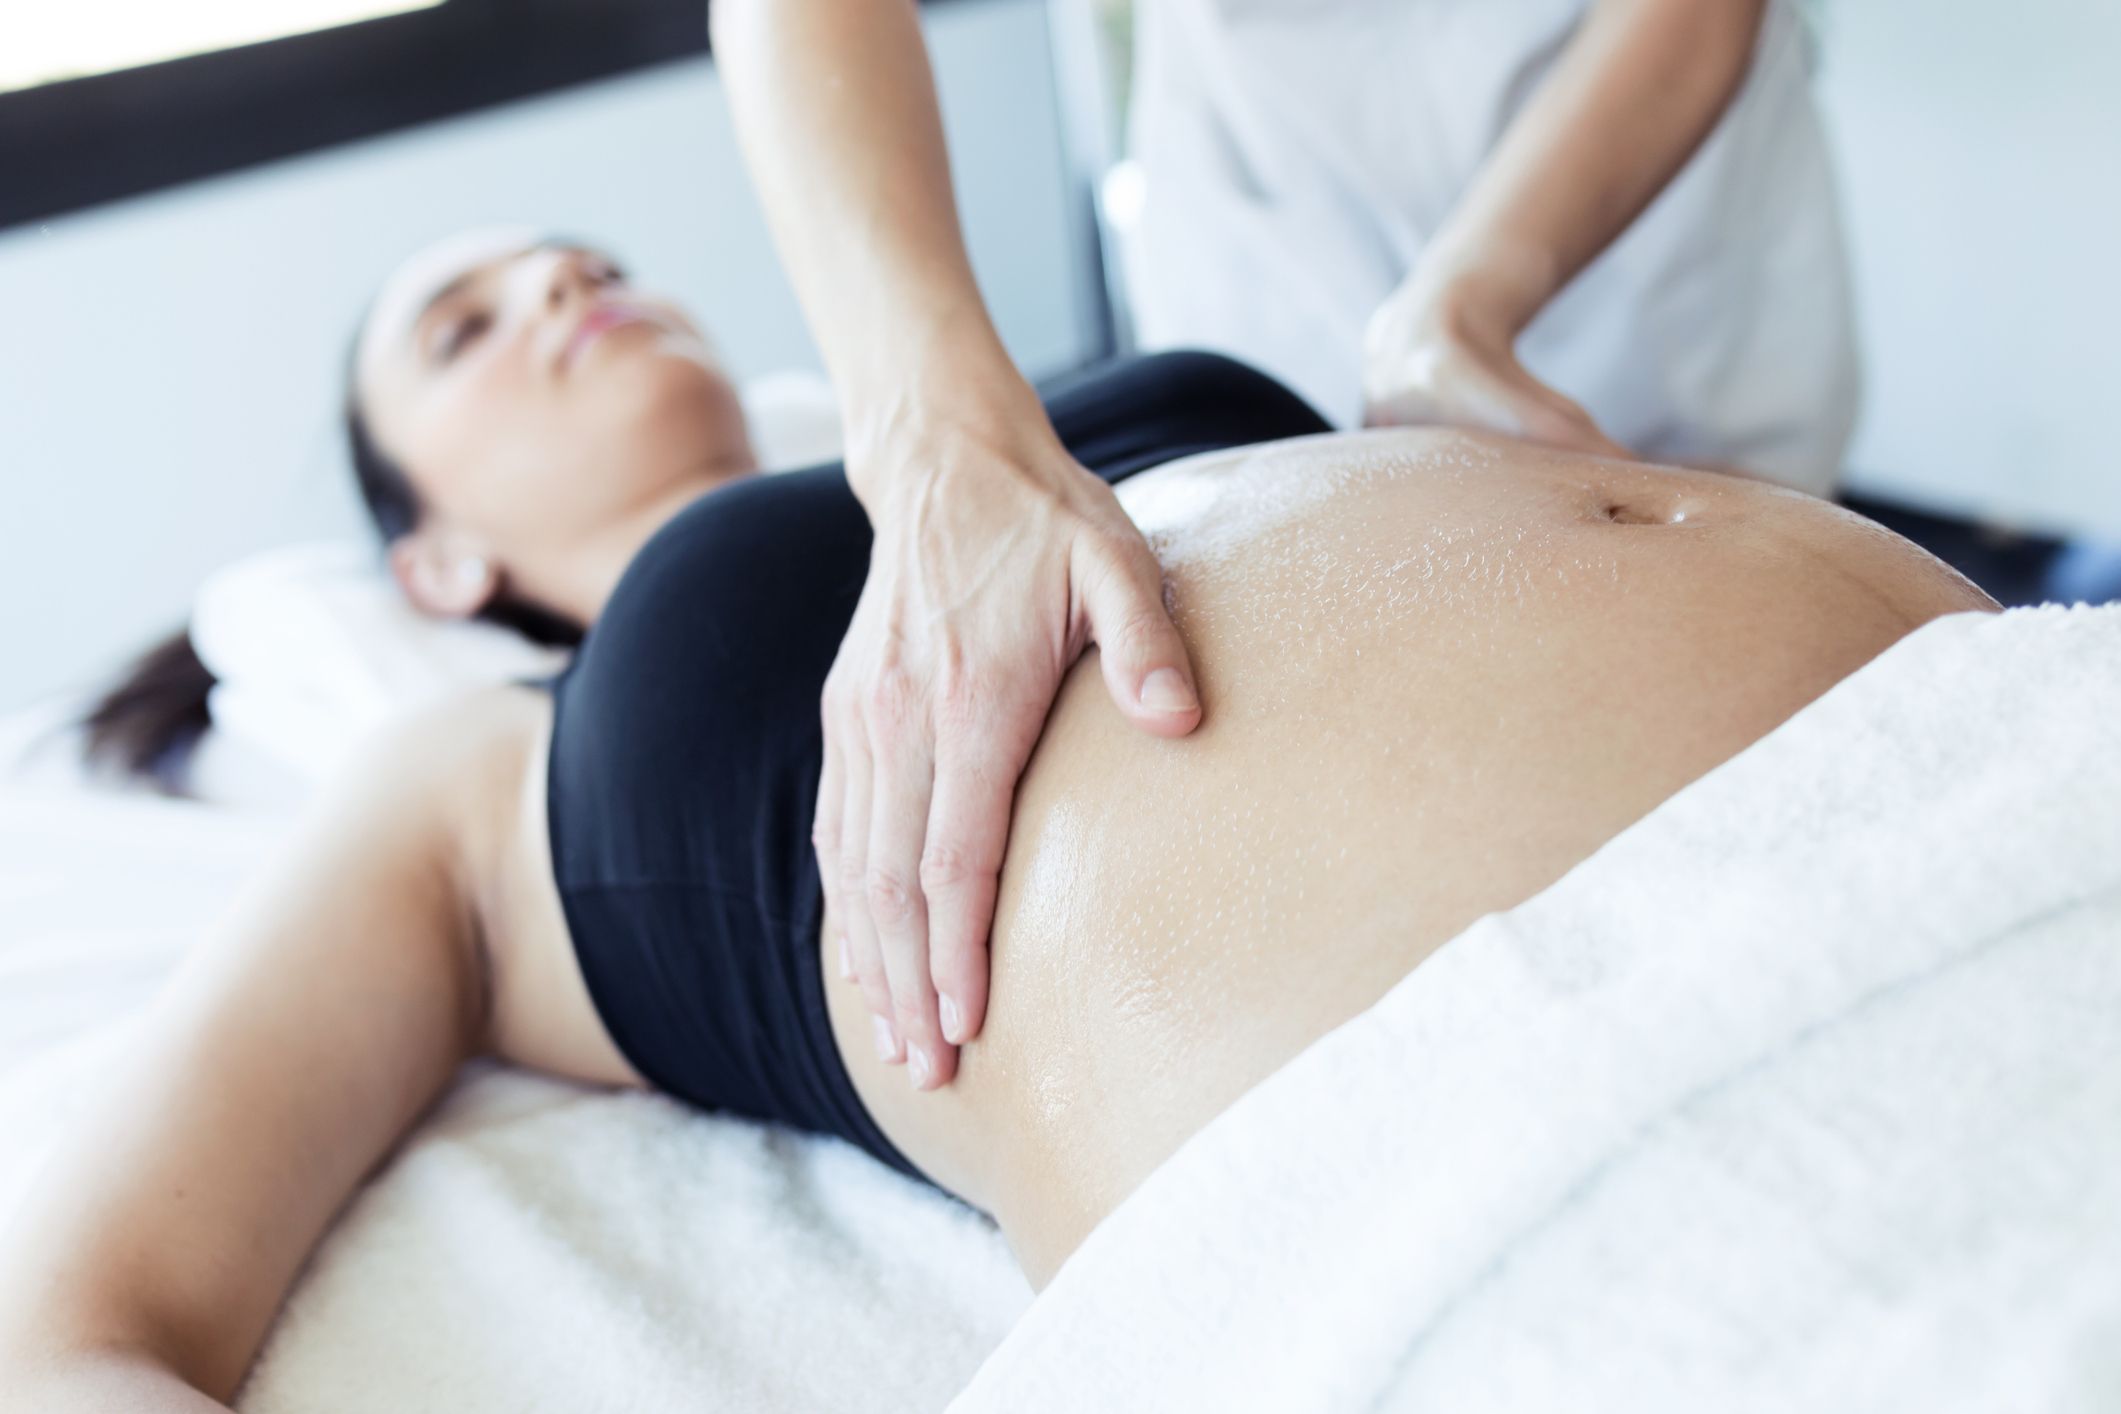 Spa Treatments That Are Safe During Pregnancy